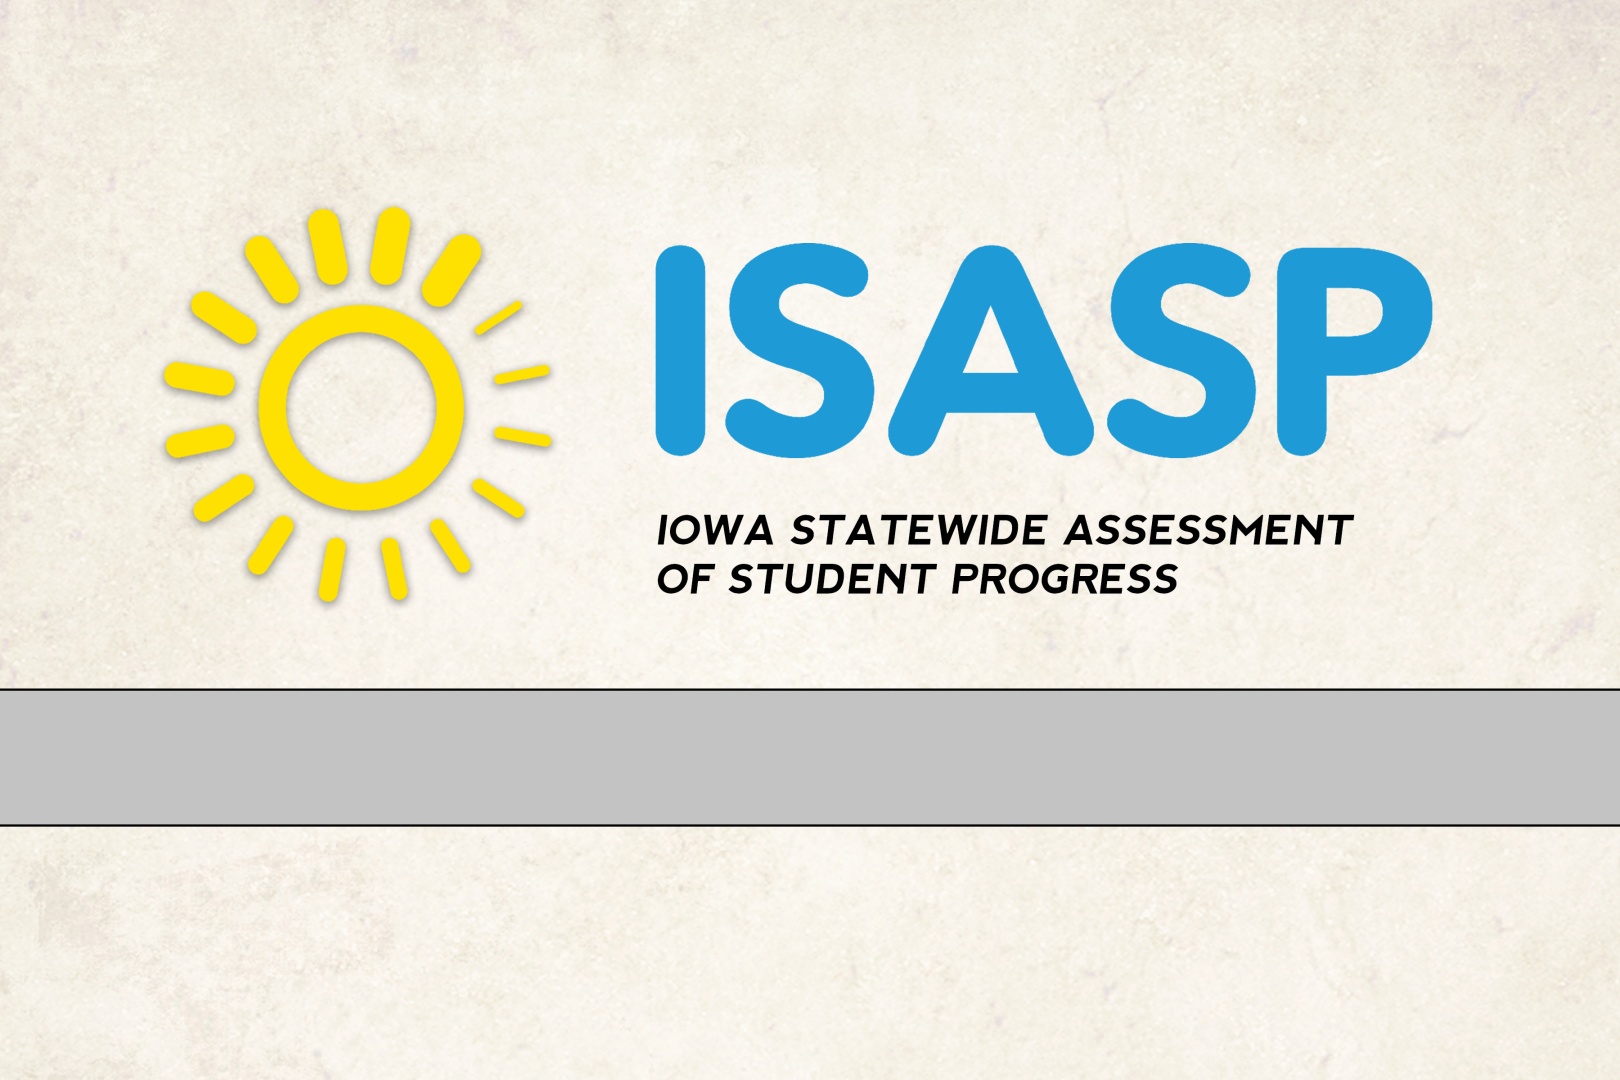 Iowa Statewide Assessment of Student Progress (ISASP) 2021